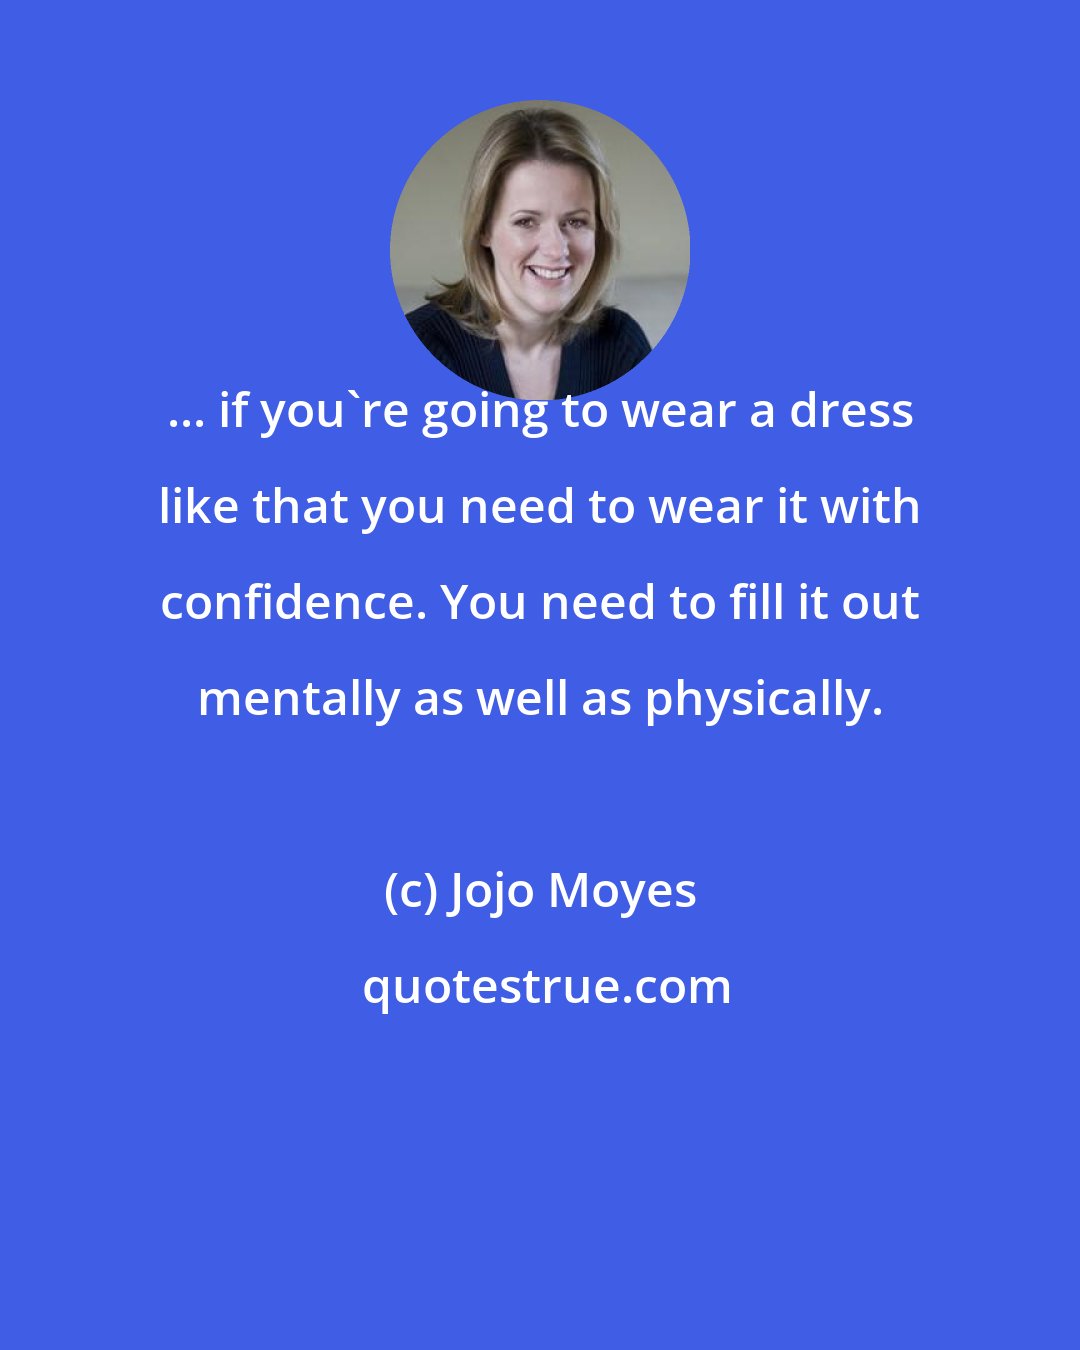 Jojo Moyes: ... if you're going to wear a dress like that you need to wear it with confidence. You need to fill it out mentally as well as physically.